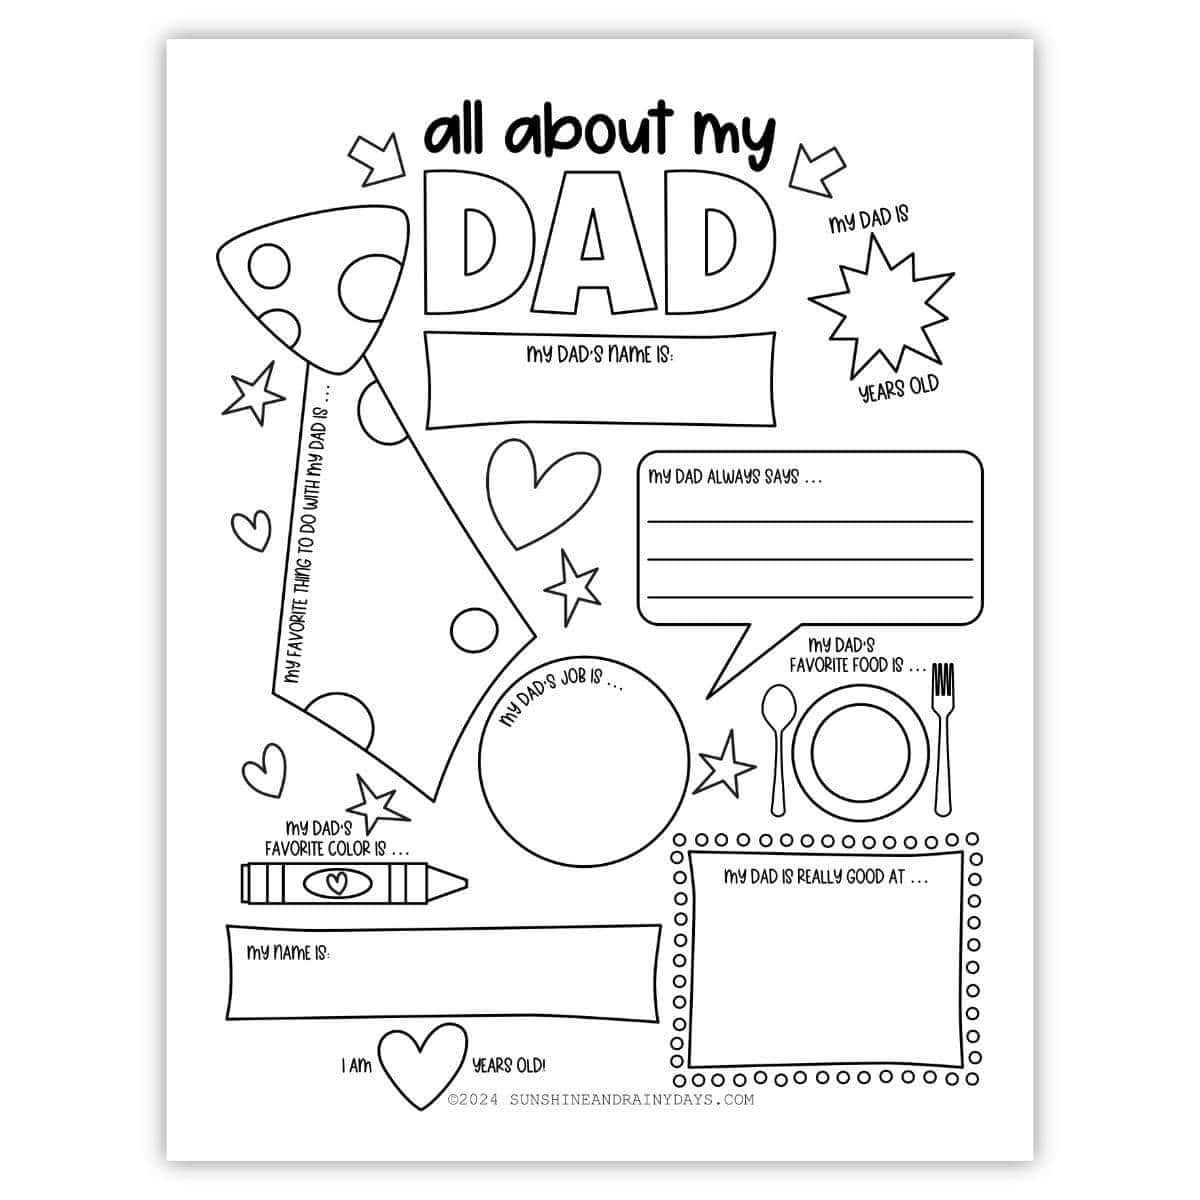 All about my dad printable coloring page.